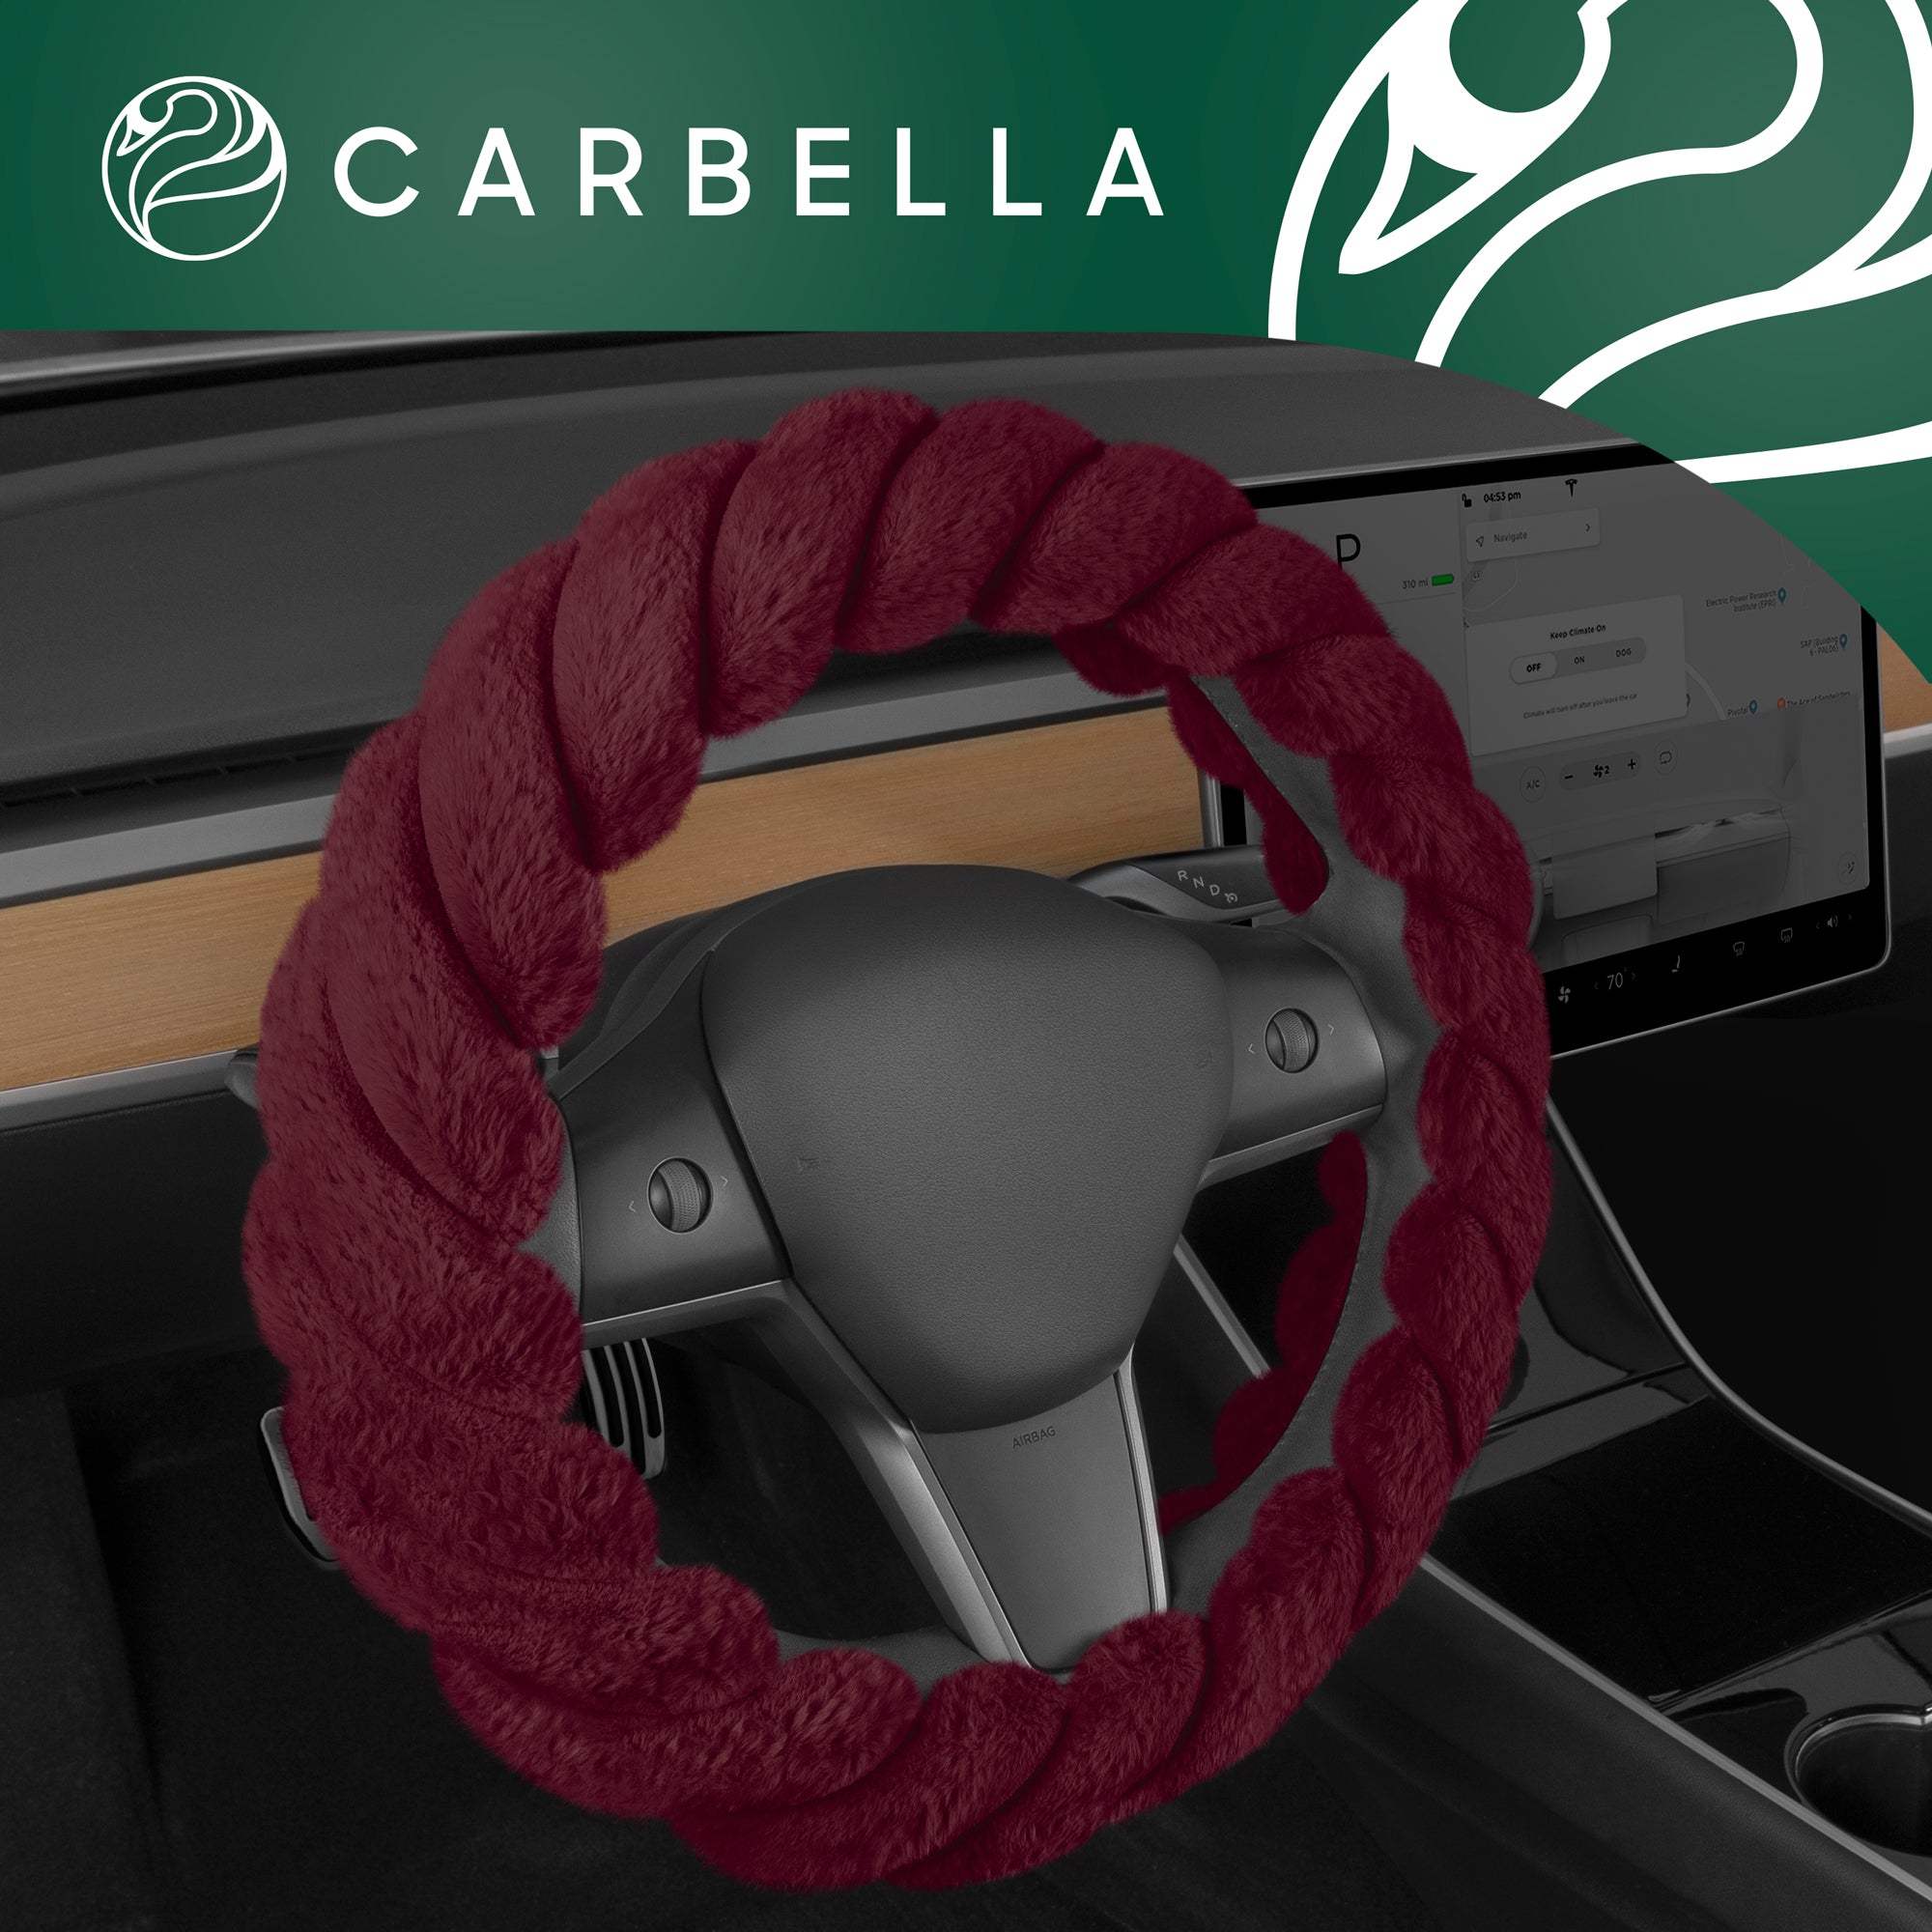 Carbella Twisted Fur Red Steering Wheel Cover, Standard 15 Inch Size Fits Most Vehicles, Fuzzy Fluffy Car Steering Cover with Soft Faux Fur Touch, Car Accessories for Women